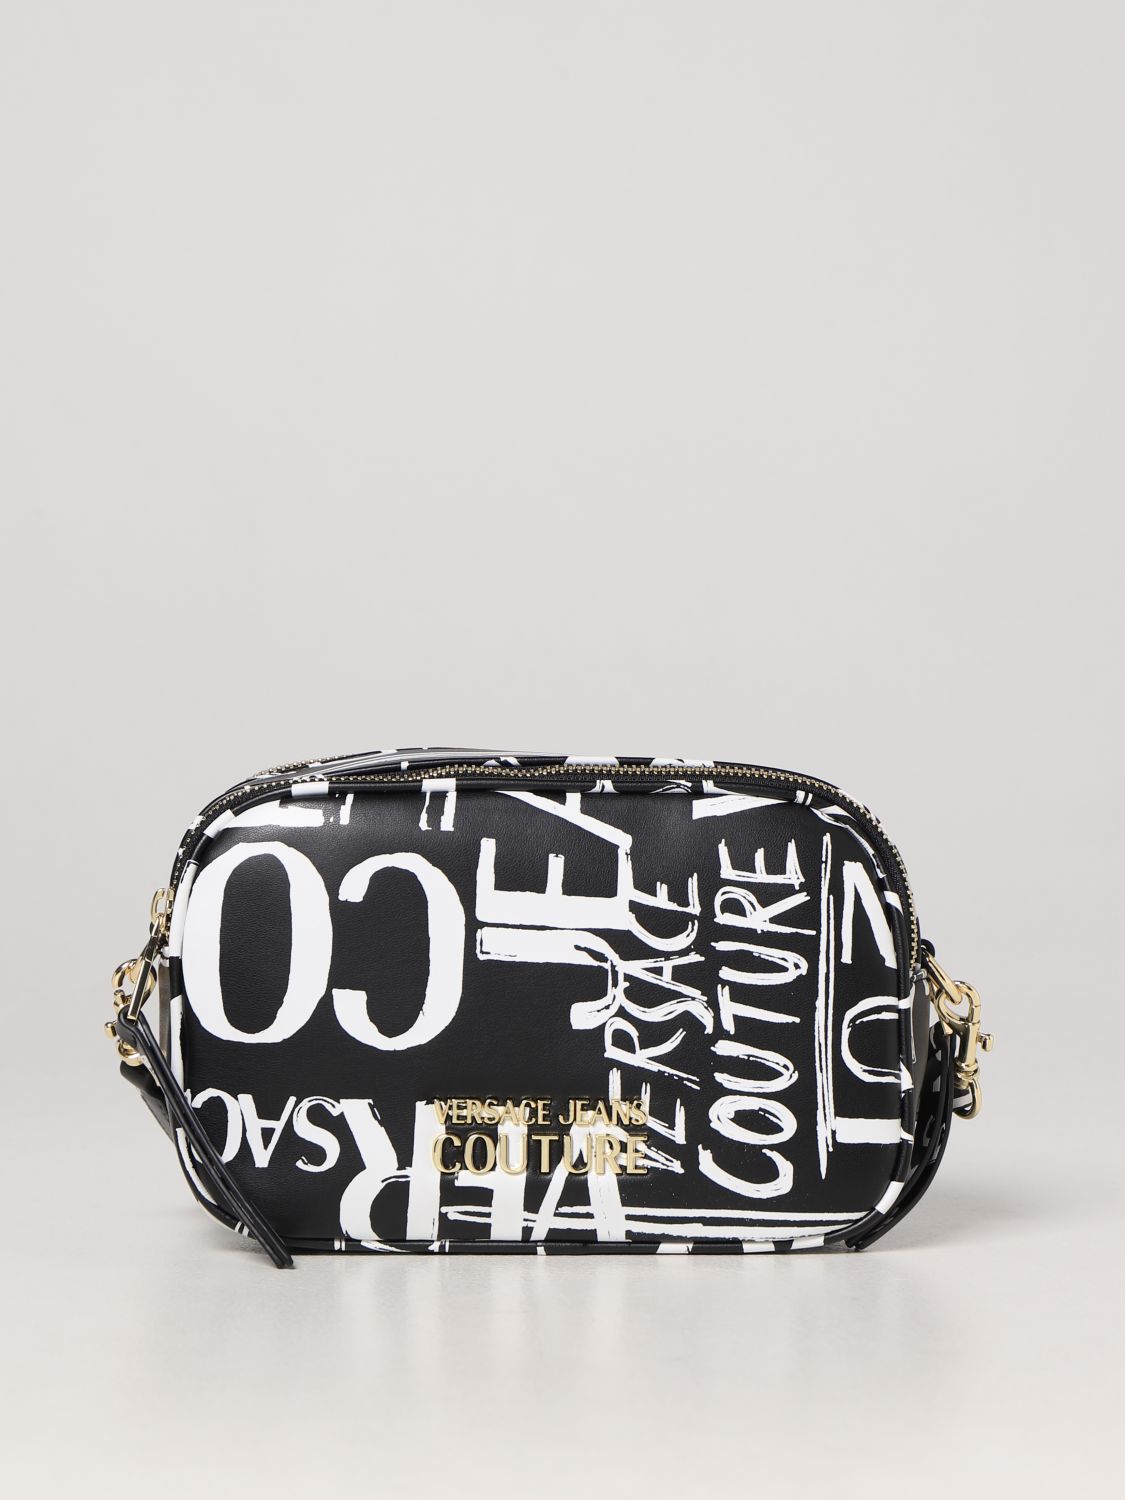 Versace Jeans Couture bag in synthetic leather with printed logo